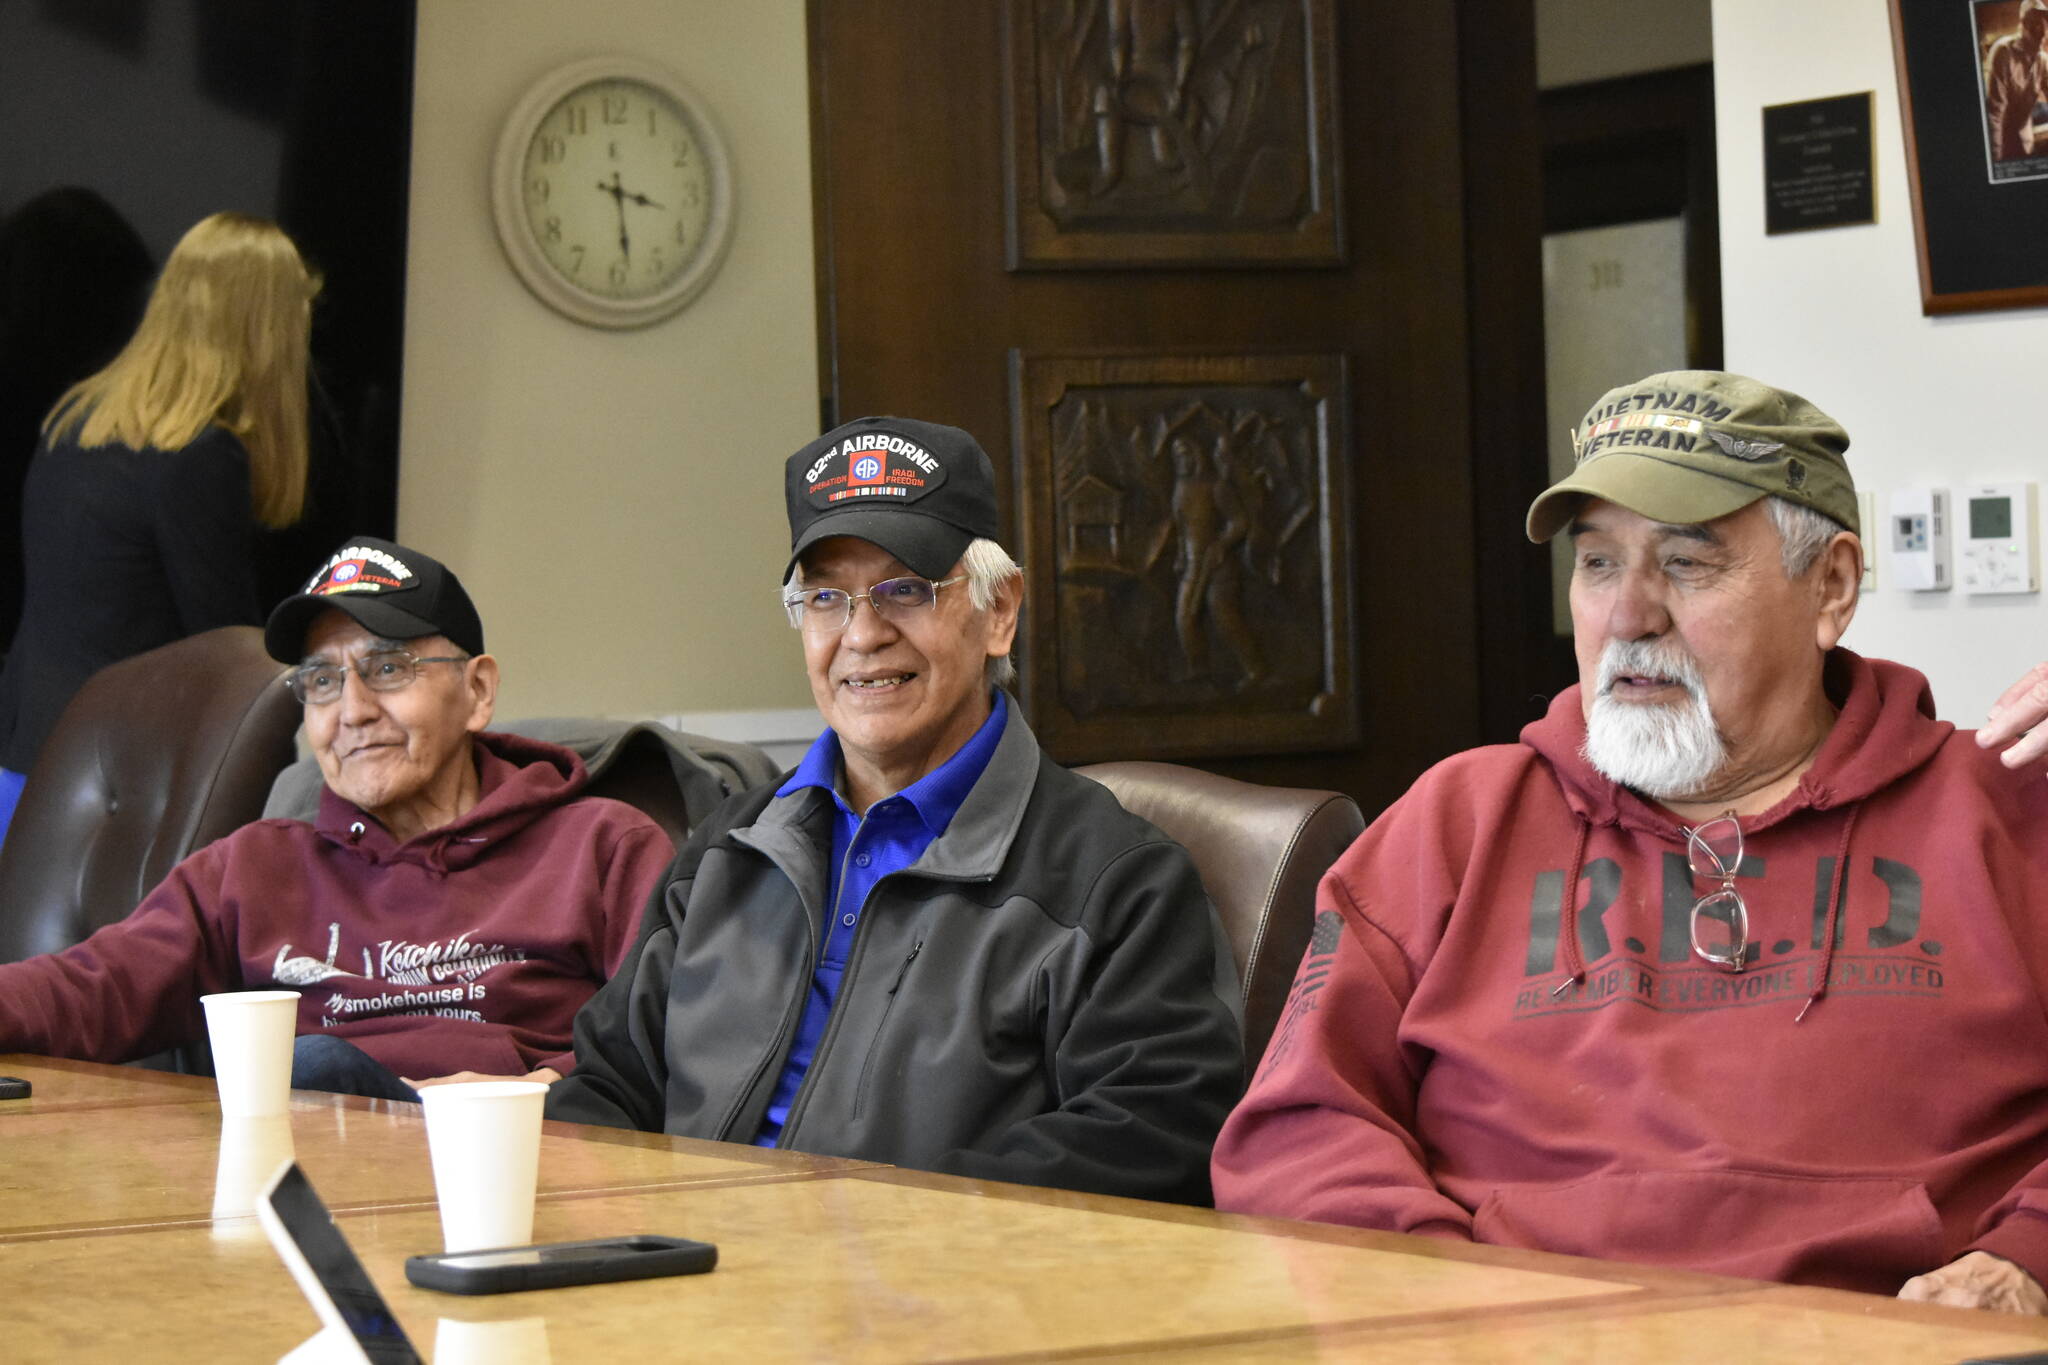 Peter Segall / Juneau Empire
From left to right: Willard Jackson, Dennis Jack and Bill Thomas, Alaska Native veterans from Southeast Alaska who met with lawmakers at the Alaska State Capitol on Friday, April 29, to discuss their issues getting land allotments from the federal government. Jackson and Thomas are veterans of the Vietnam War who are eligbile for land allotments, but no lands are available in Southeast Alaska, and veterans are frustrated by the lack of action.